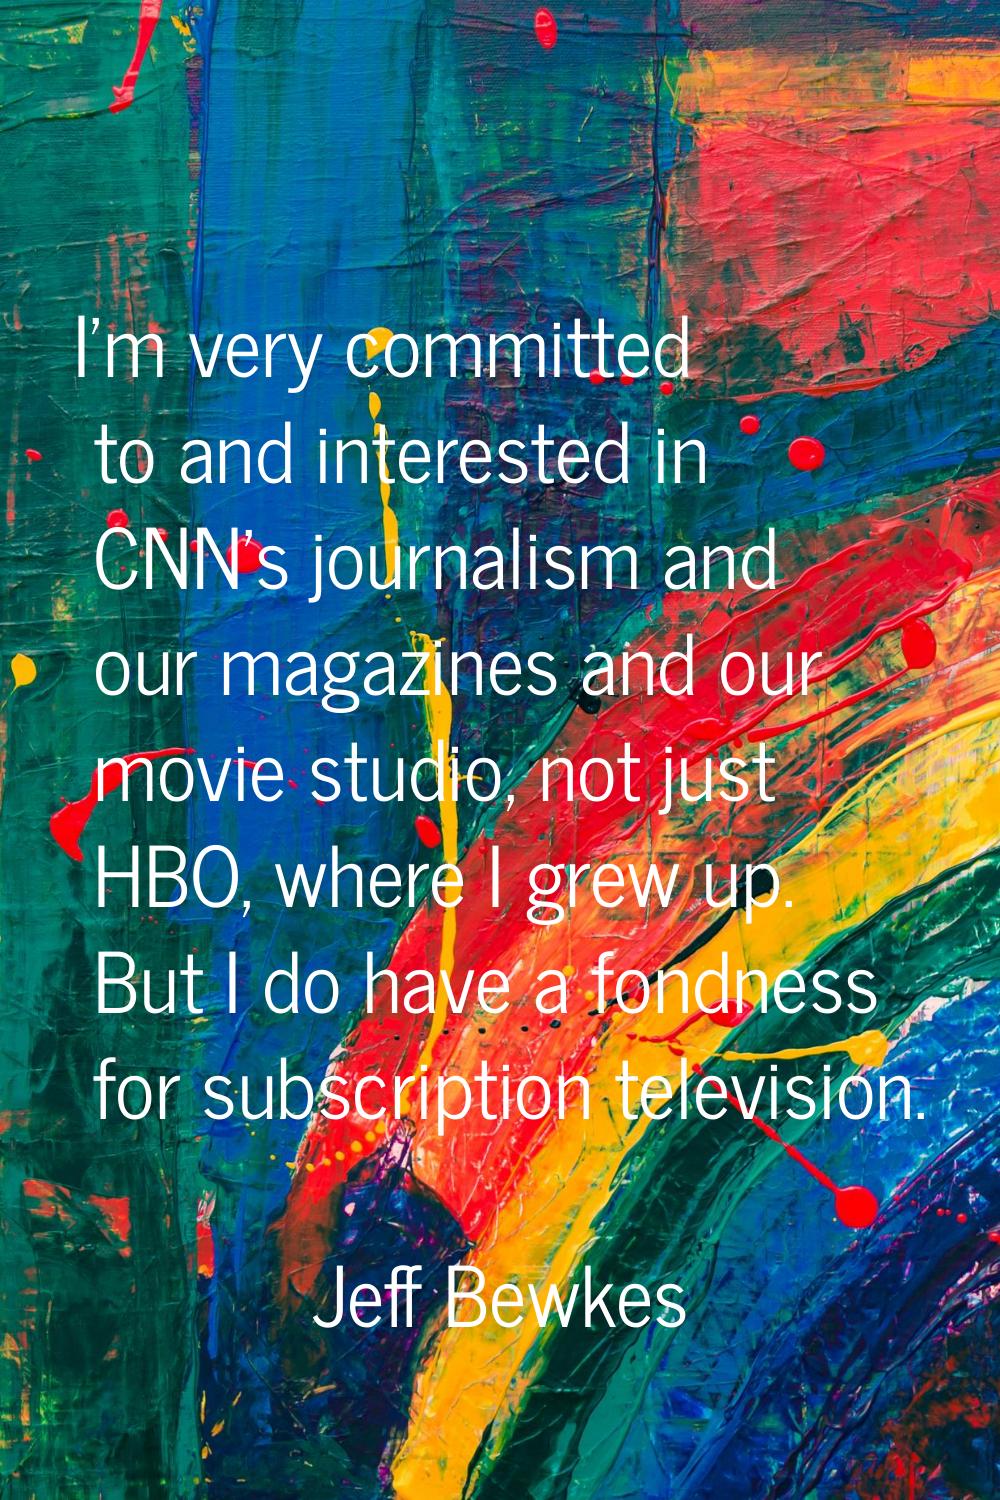 I'm very committed to and interested in CNN's journalism and our magazines and our movie studio, no